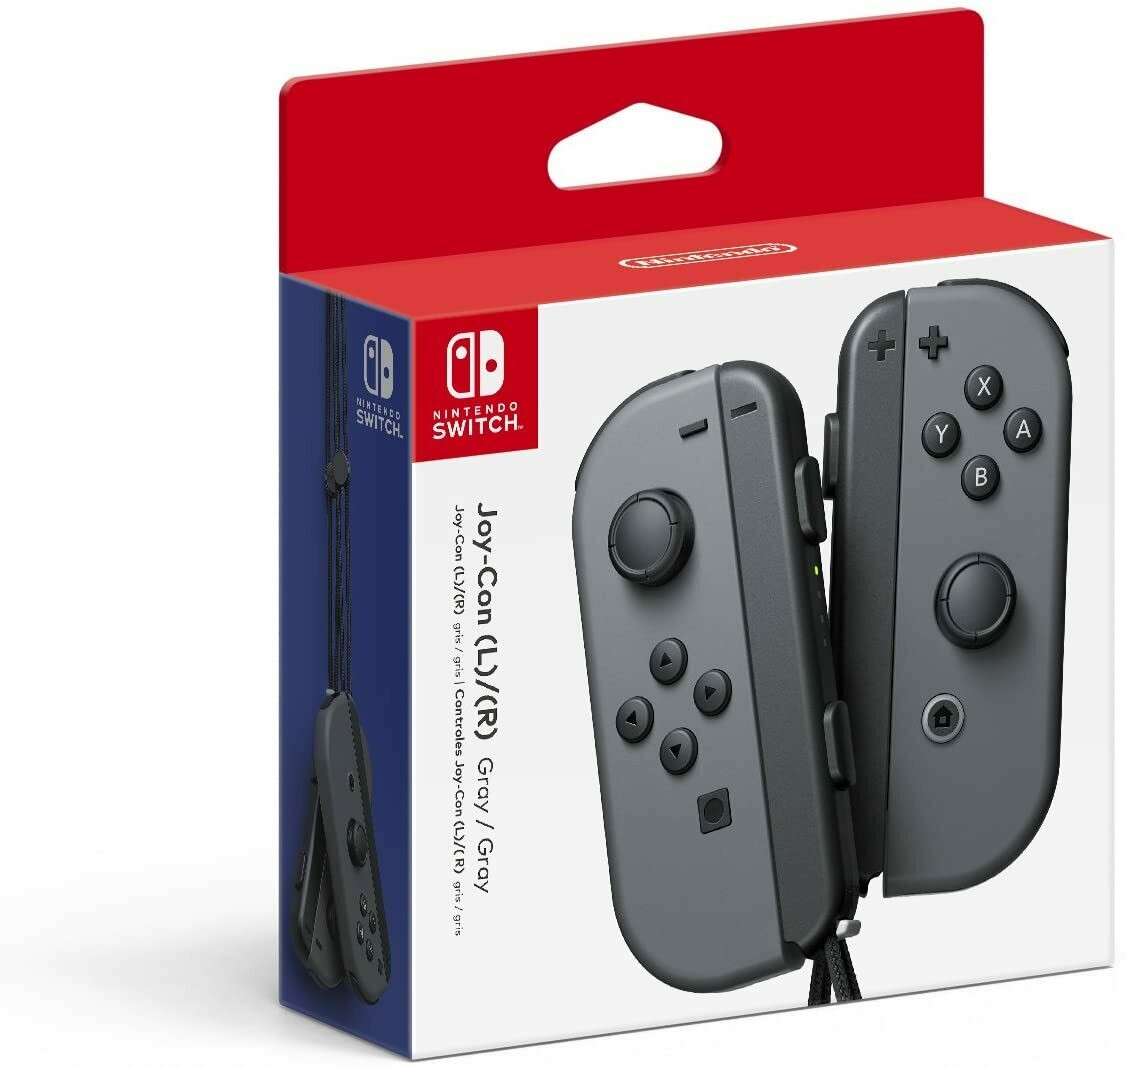 Here's where to pre order the new pastel Joy Con controllers for